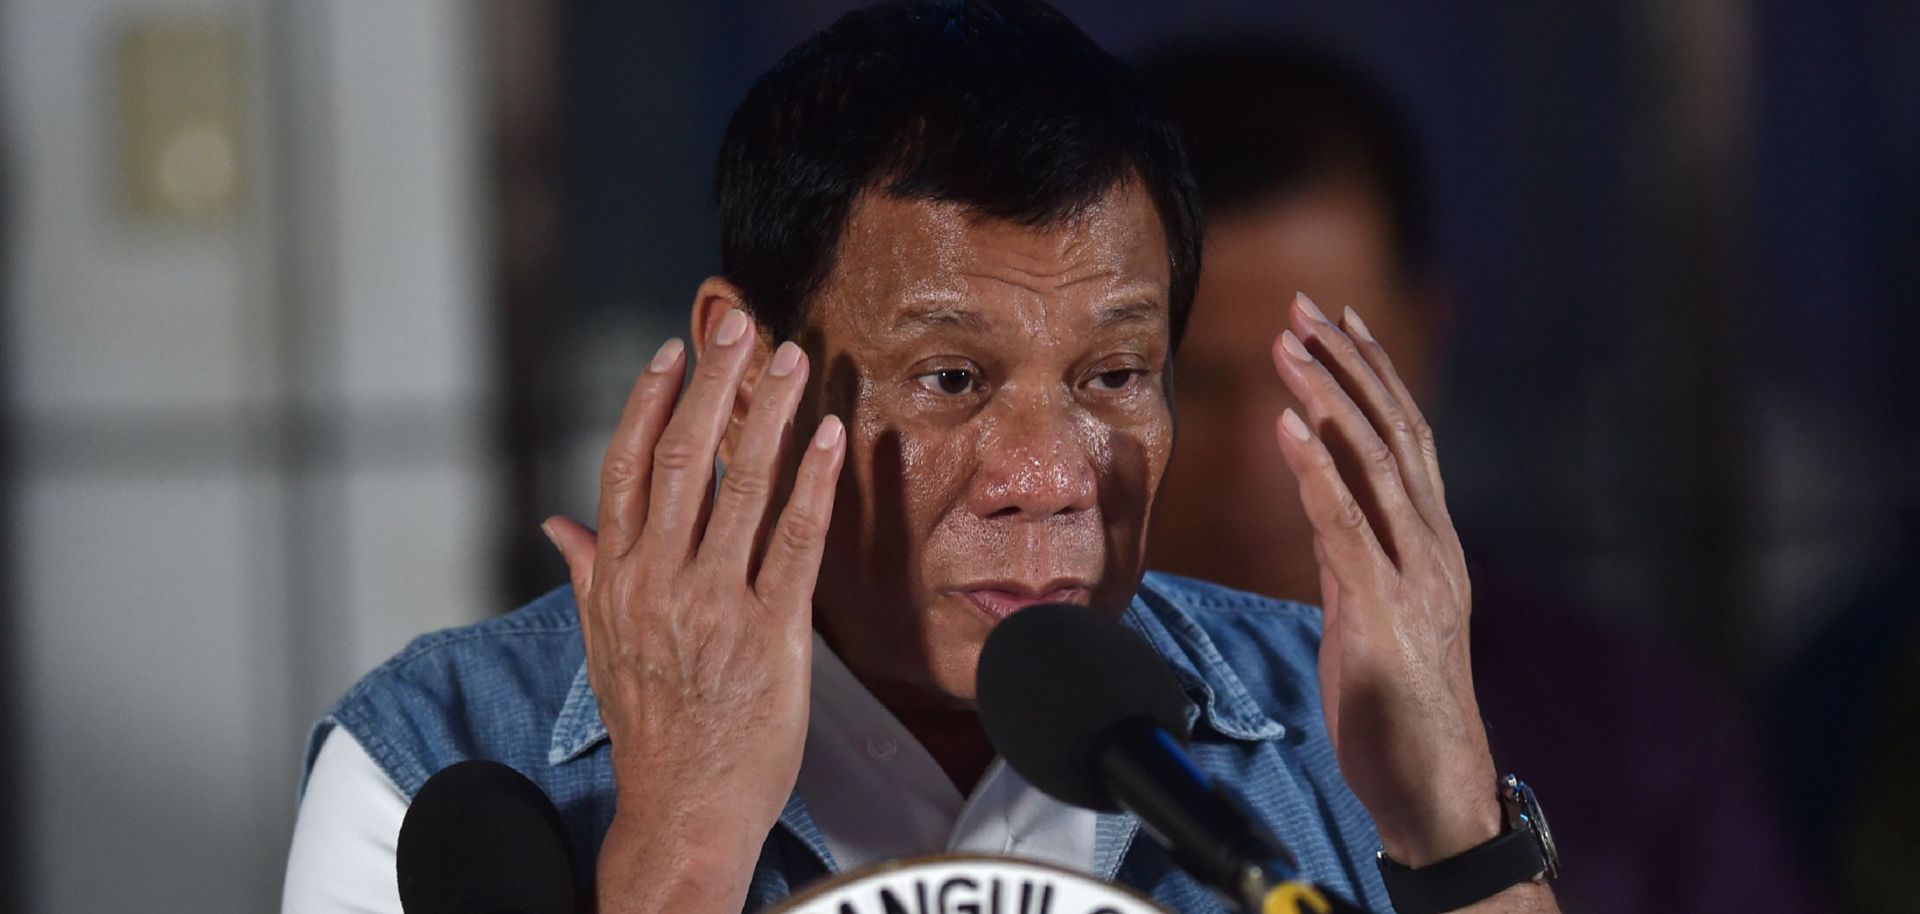 Philippine President Rodrigo Duterte gestures while delivering a speech on the southern island of Mindanao on June 20, 2017.